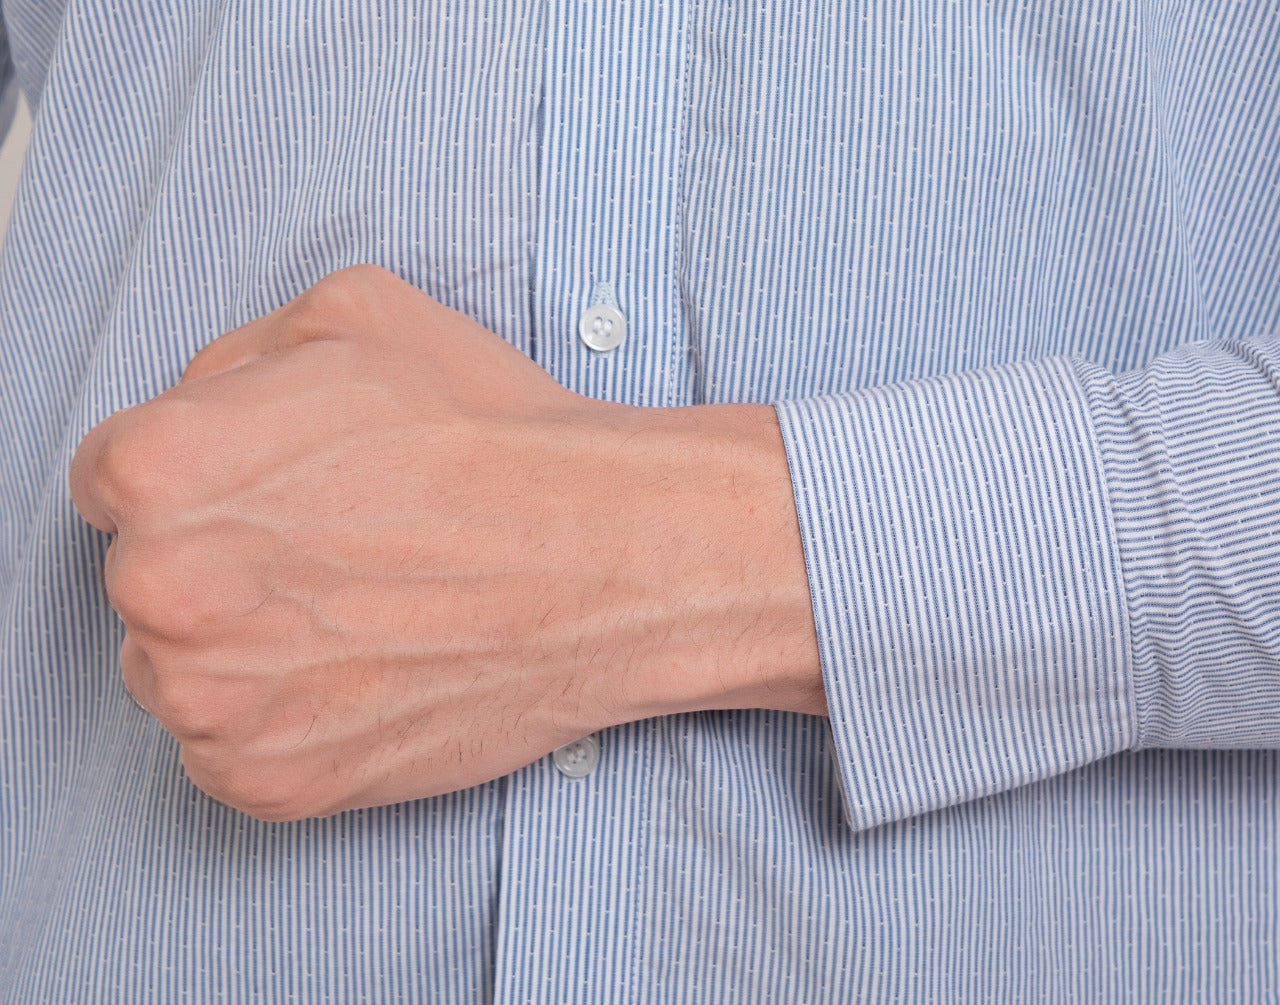 Dotted dobby blue lining formal shirt